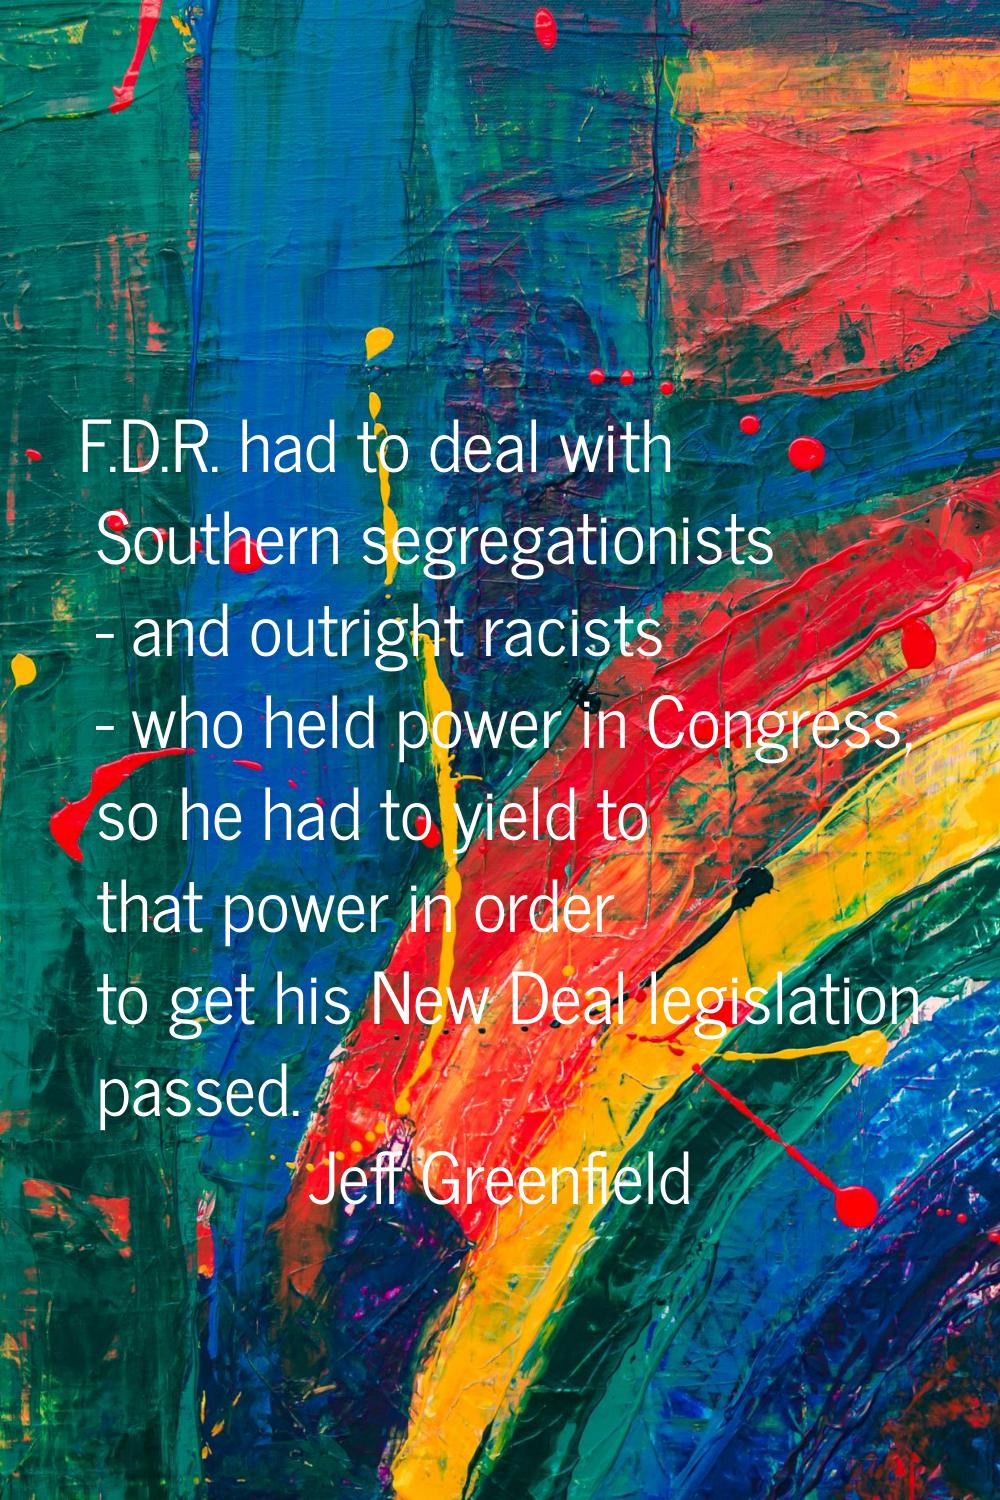 F.D.R. had to deal with Southern segregationists - and outright racists - who held power in Congres